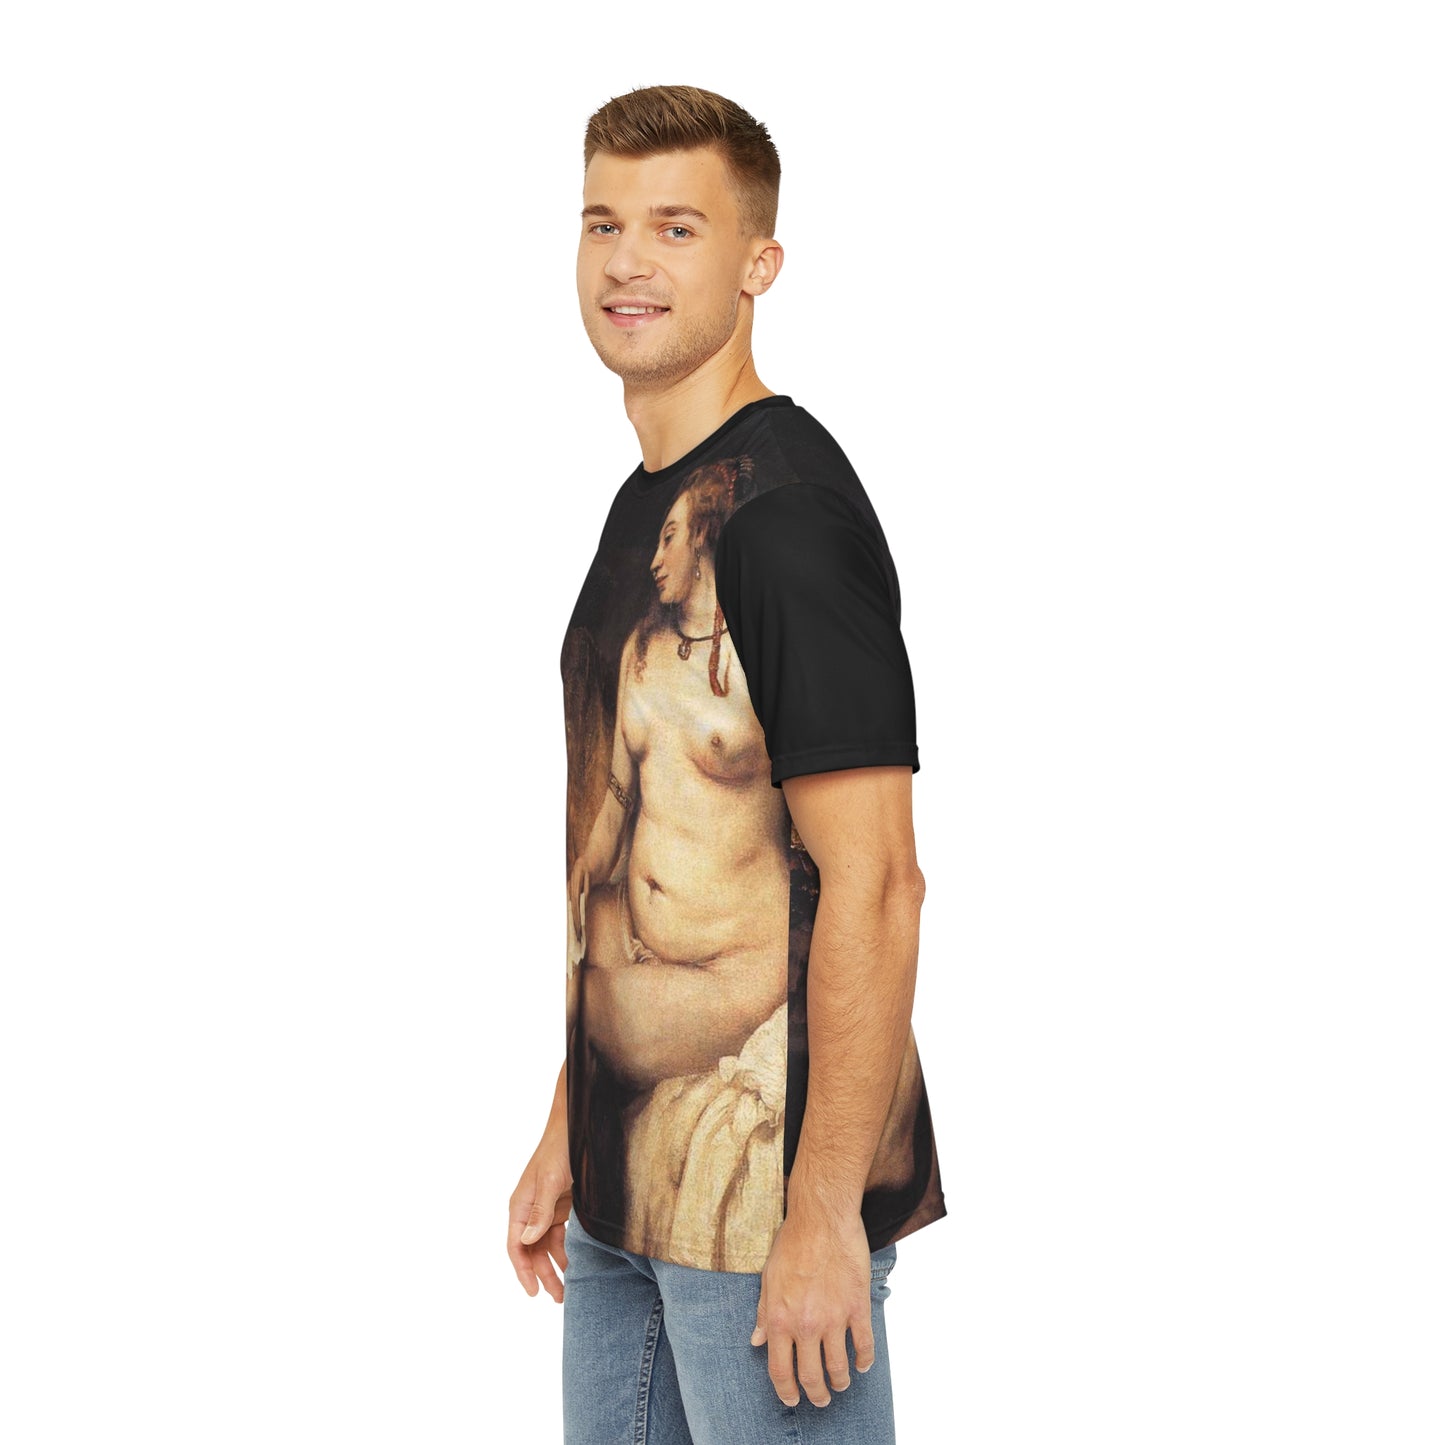 Bathsheba at Her Bath Painting by Rembrandt Classic Art Men's Polyester Tee (AOP)